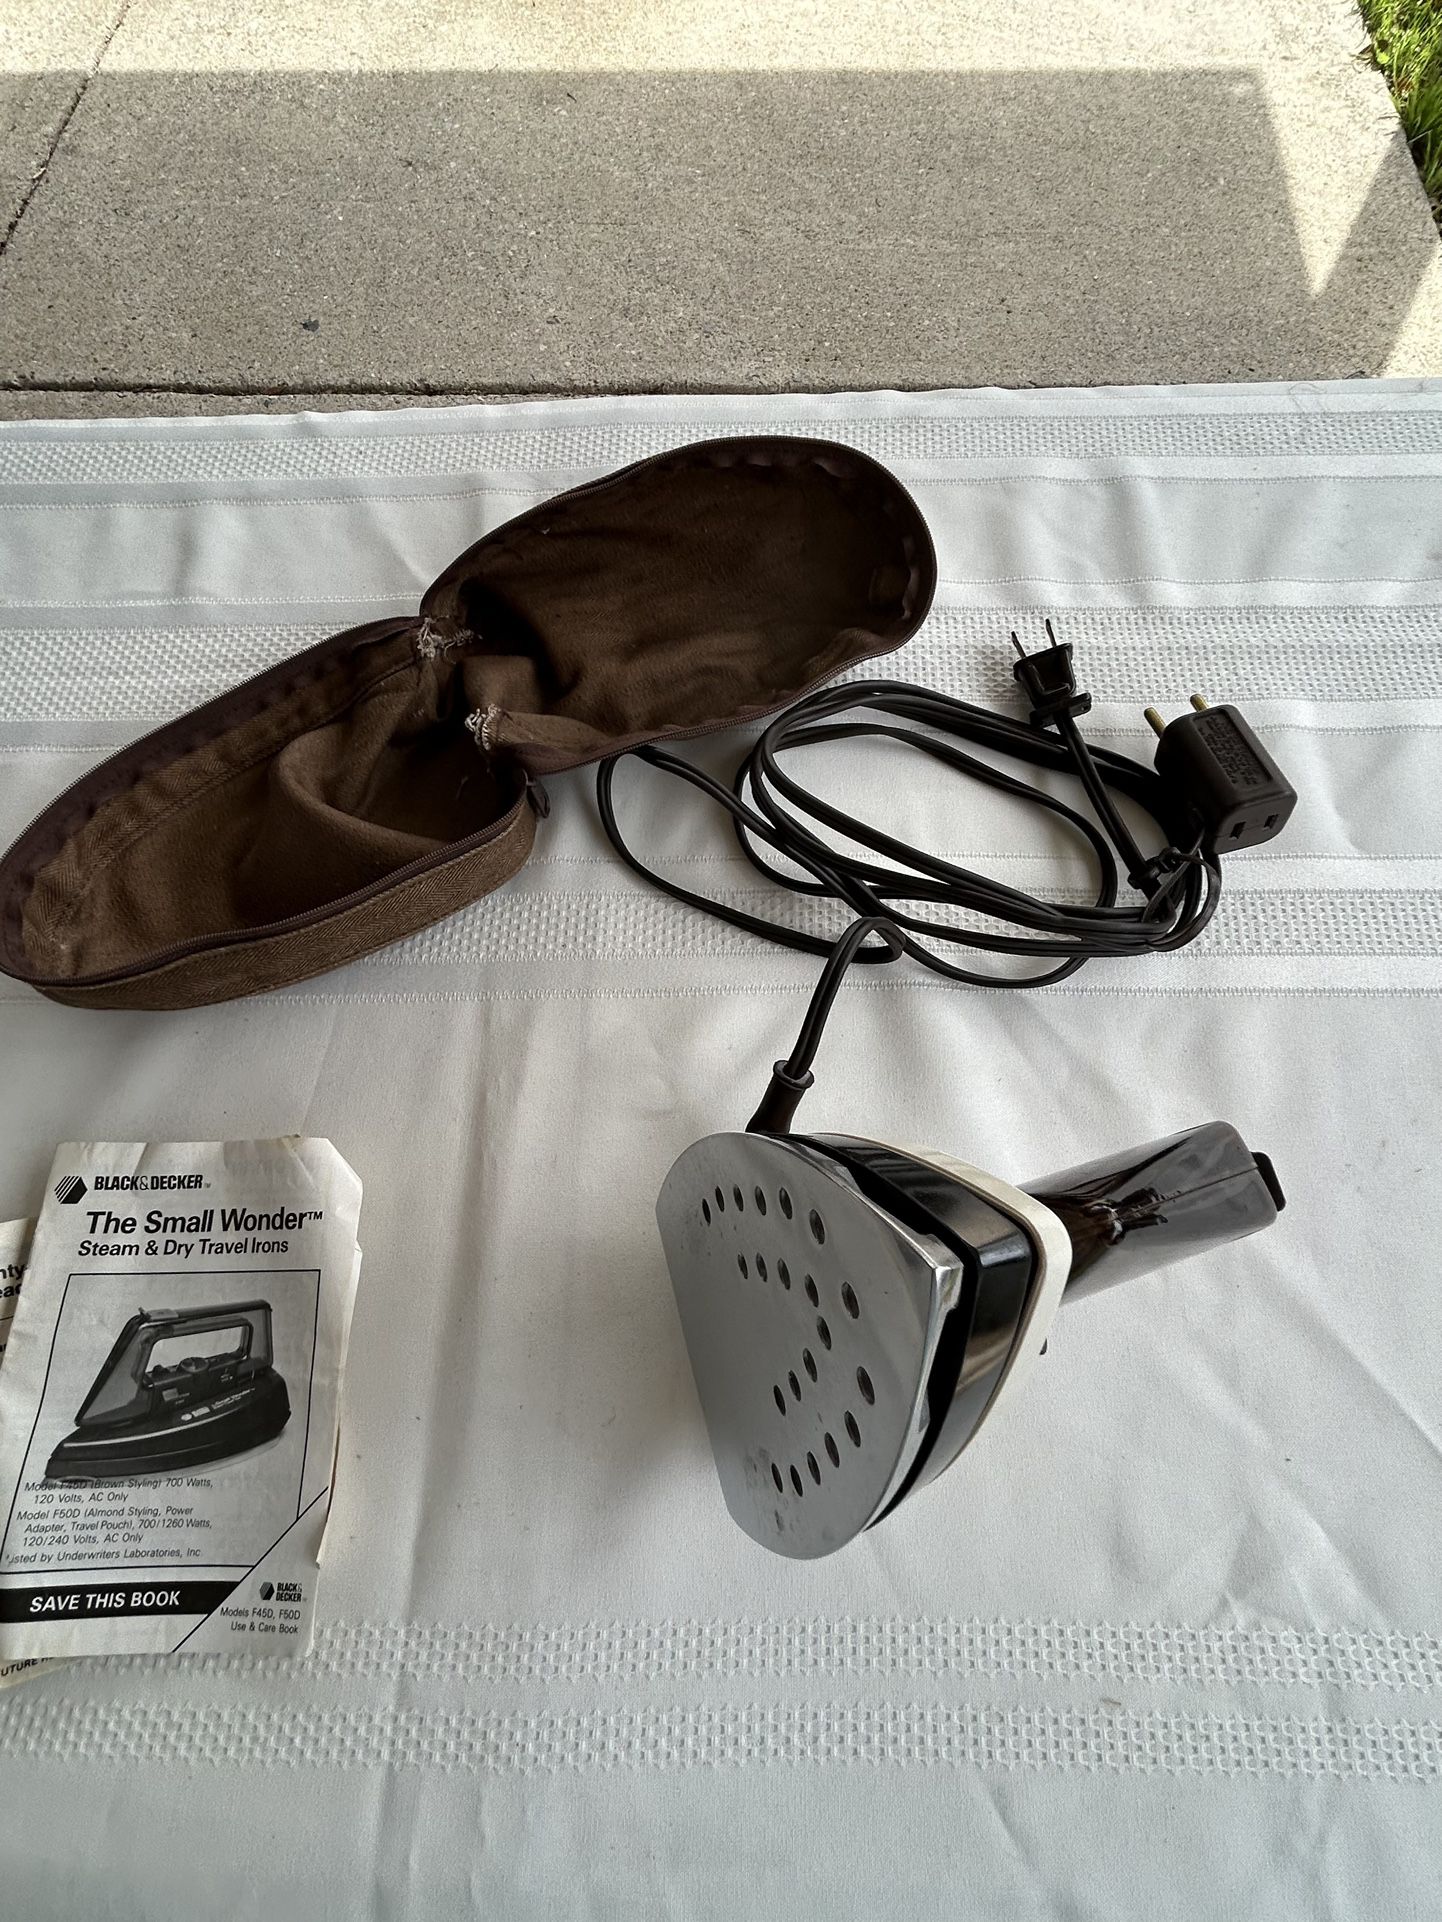 Vintage Black And Decker  “The Small Wonder” Travel Iron